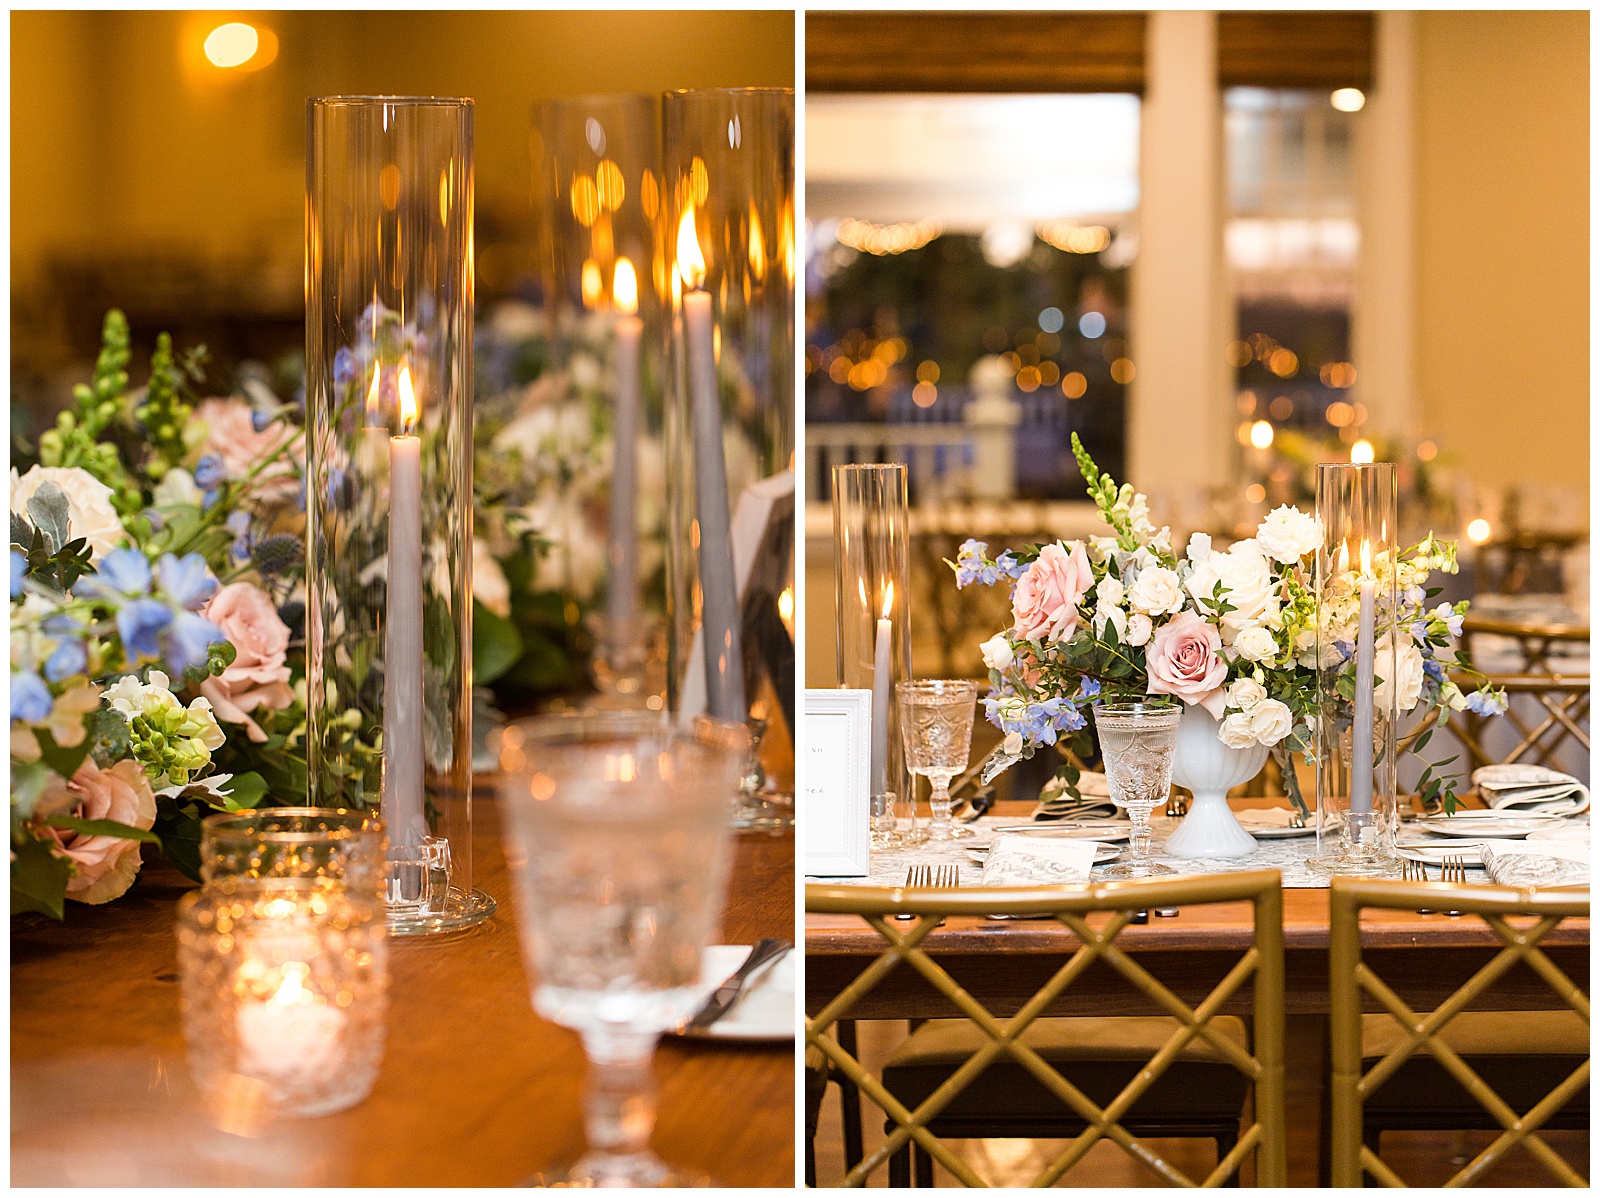 Table arrangements and decor by Jessica Hennessey Weddings and Beach Plum Florals